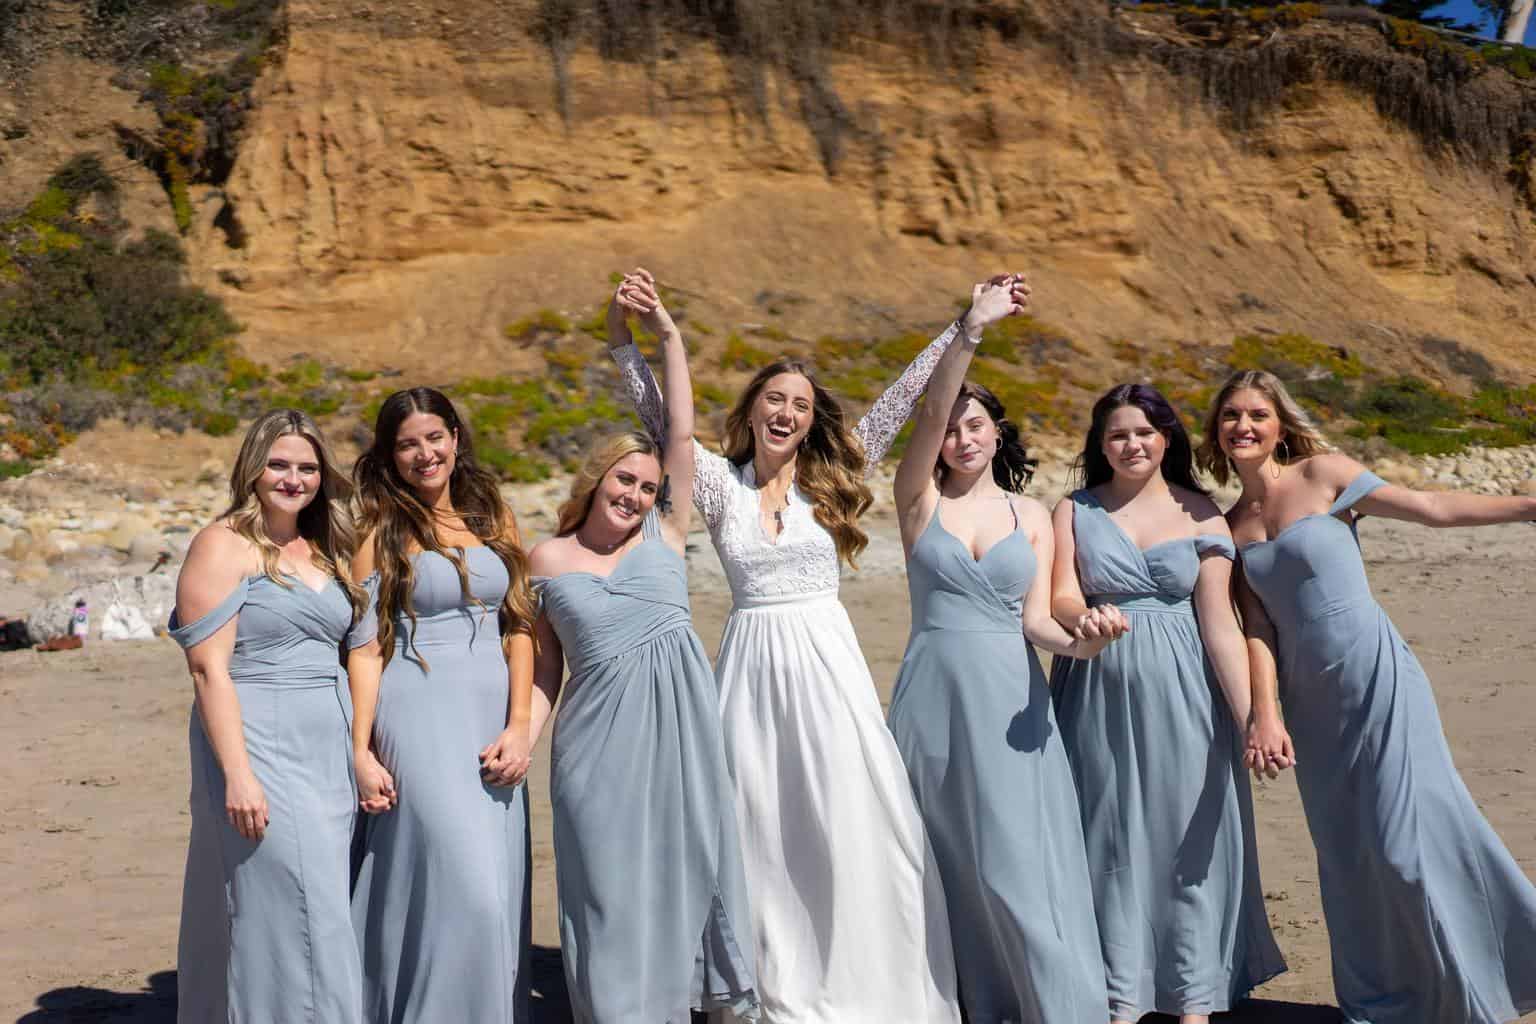 six women in white dresses standing on brown rock formation during daytime